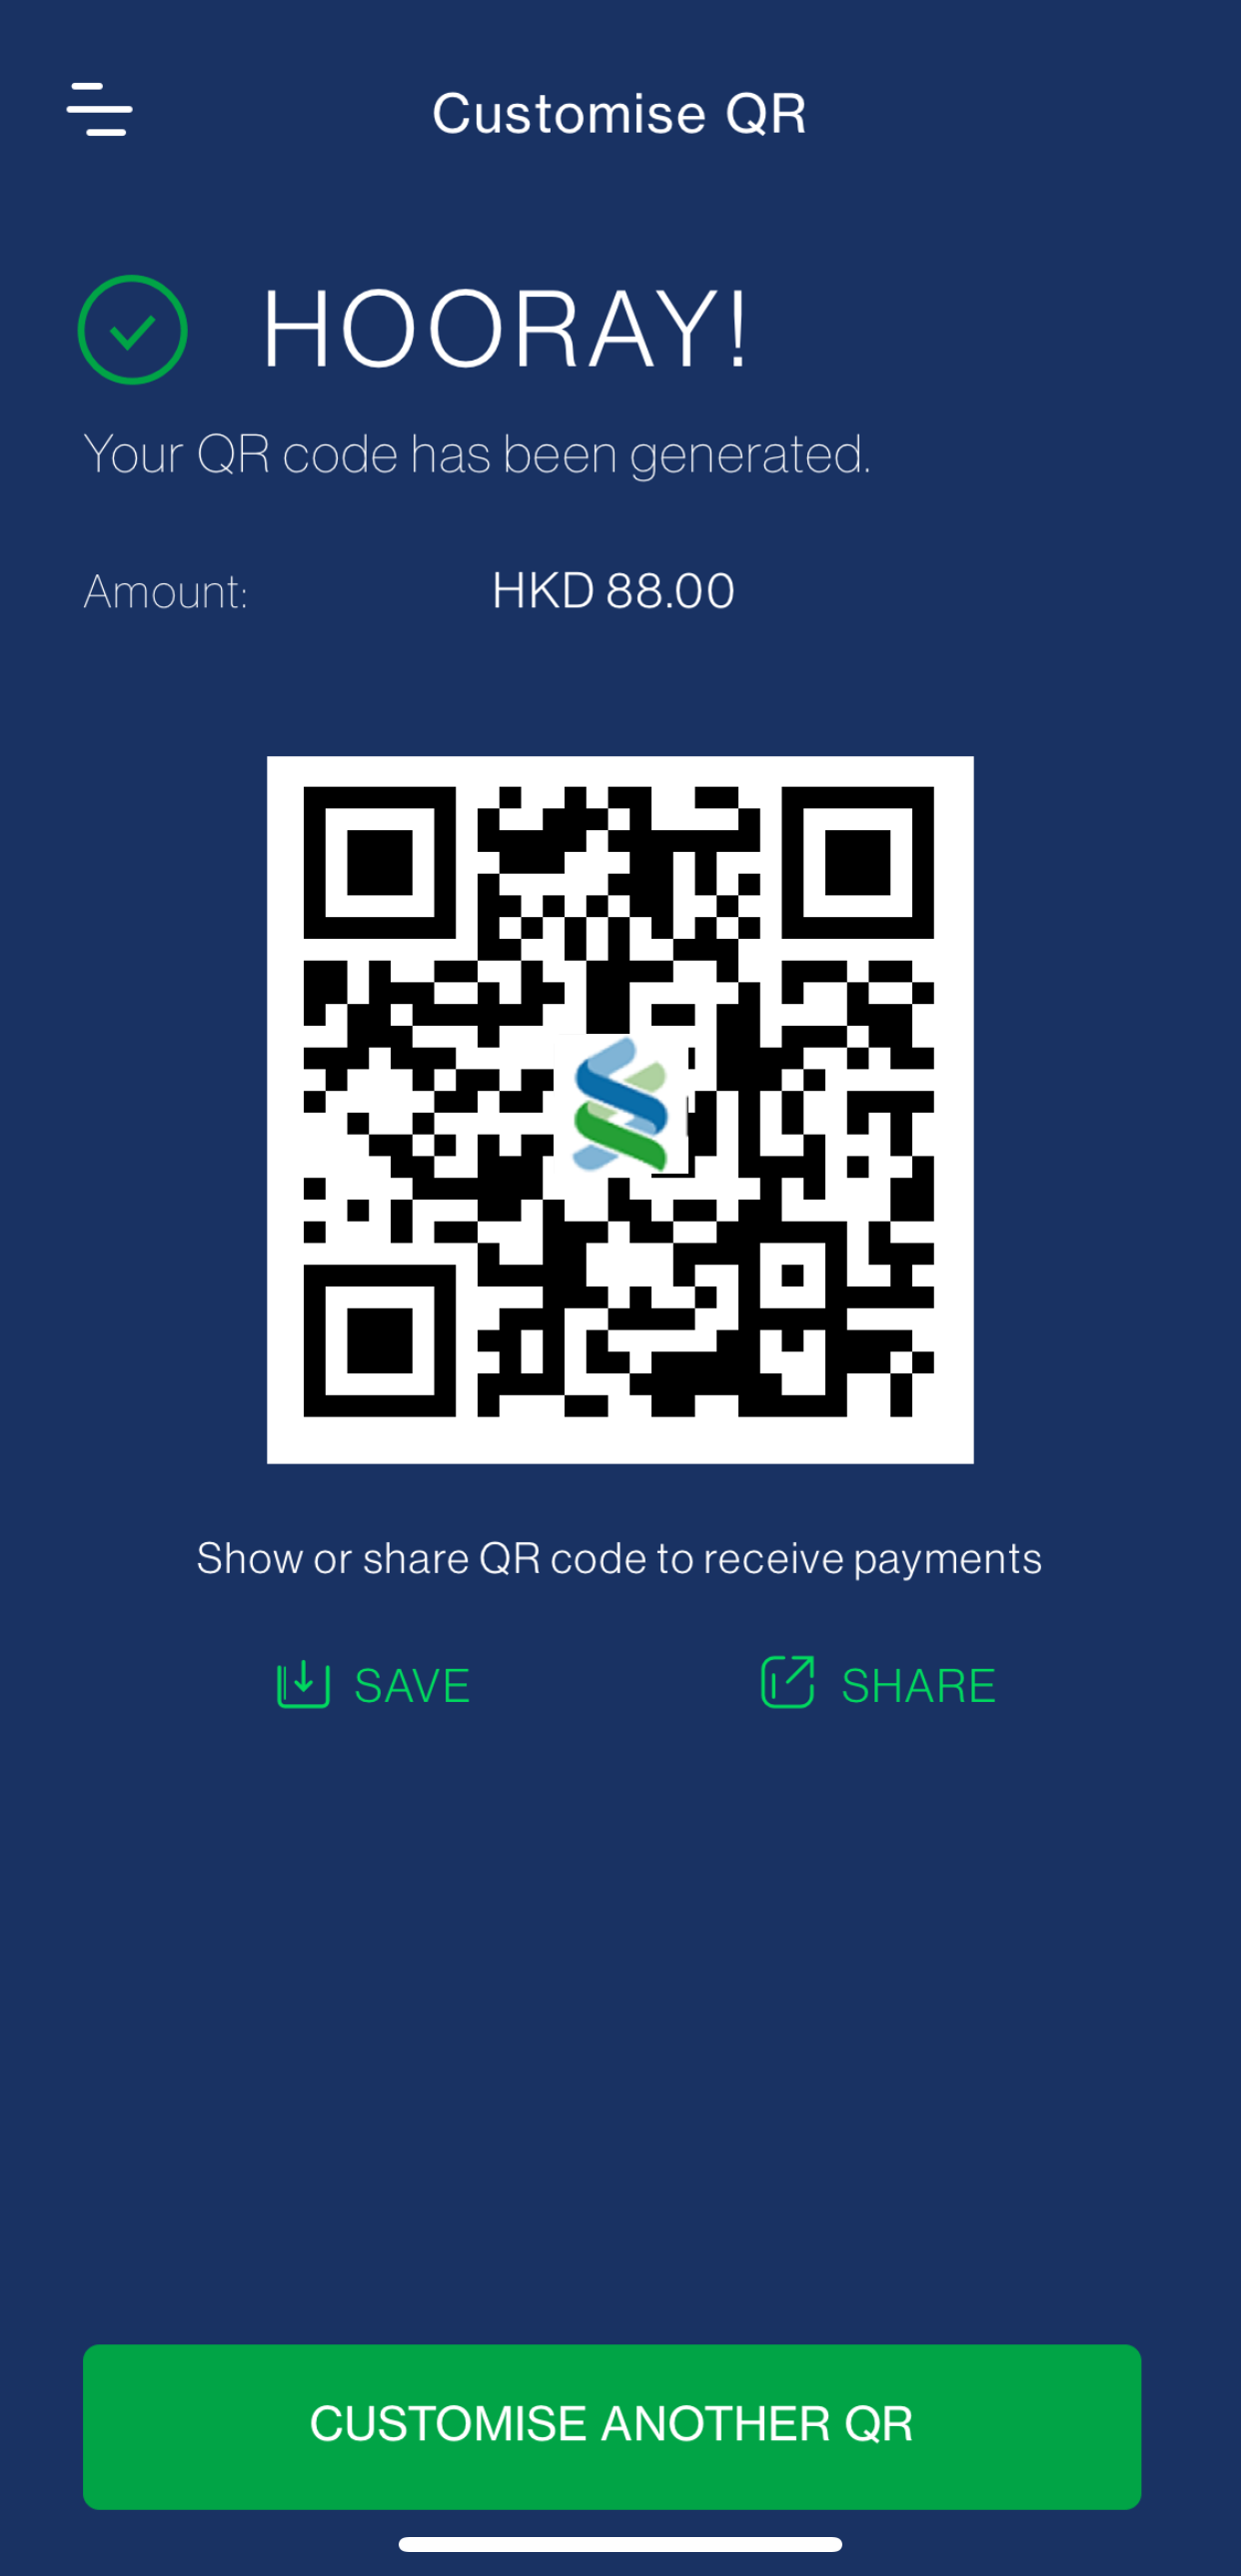 Your QR code is generated! You can show or share it to receive payments.